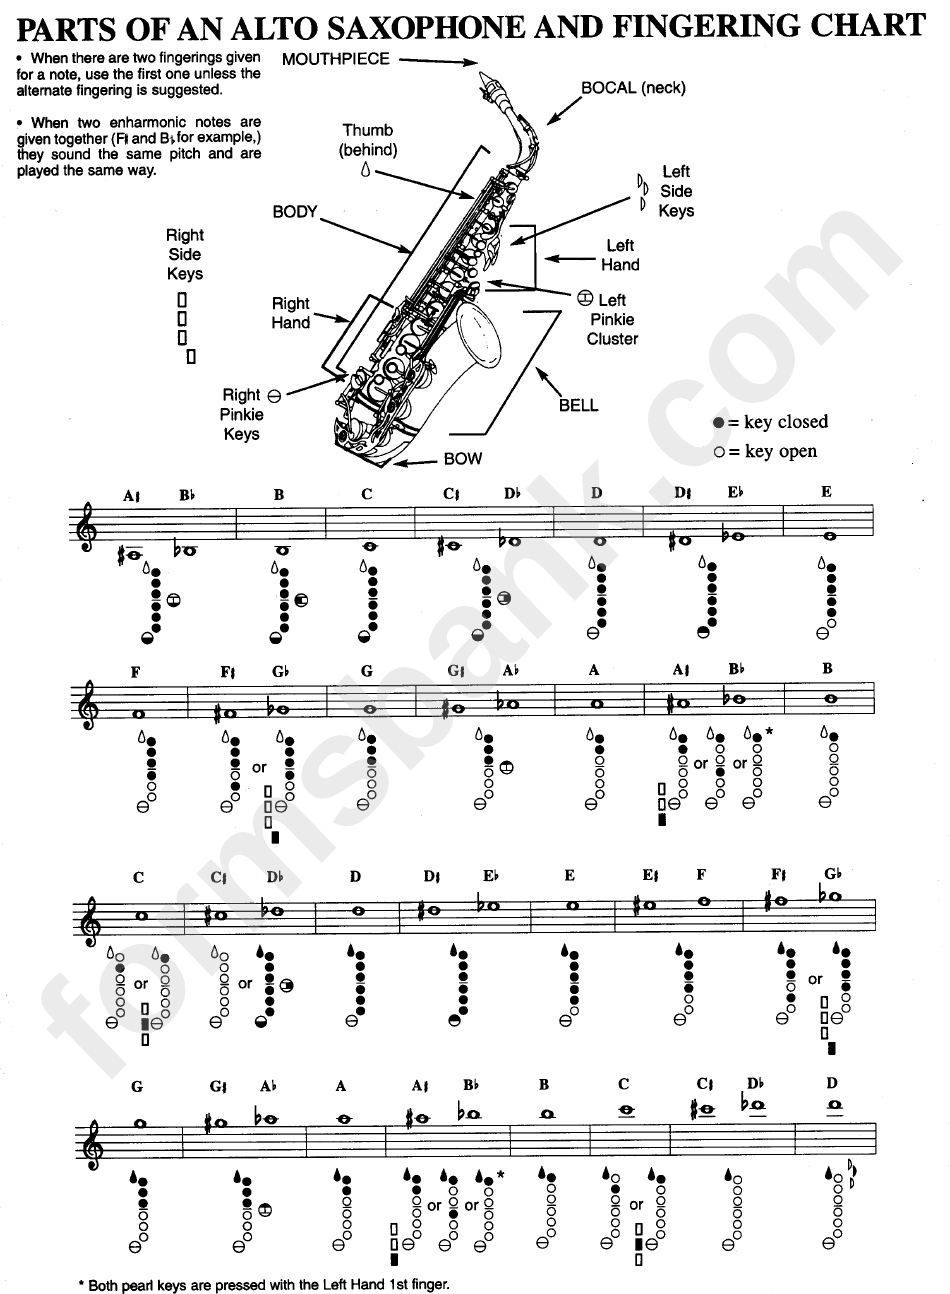 Parts Of An Alto Saxophone And Fingering Chart printable pdf download